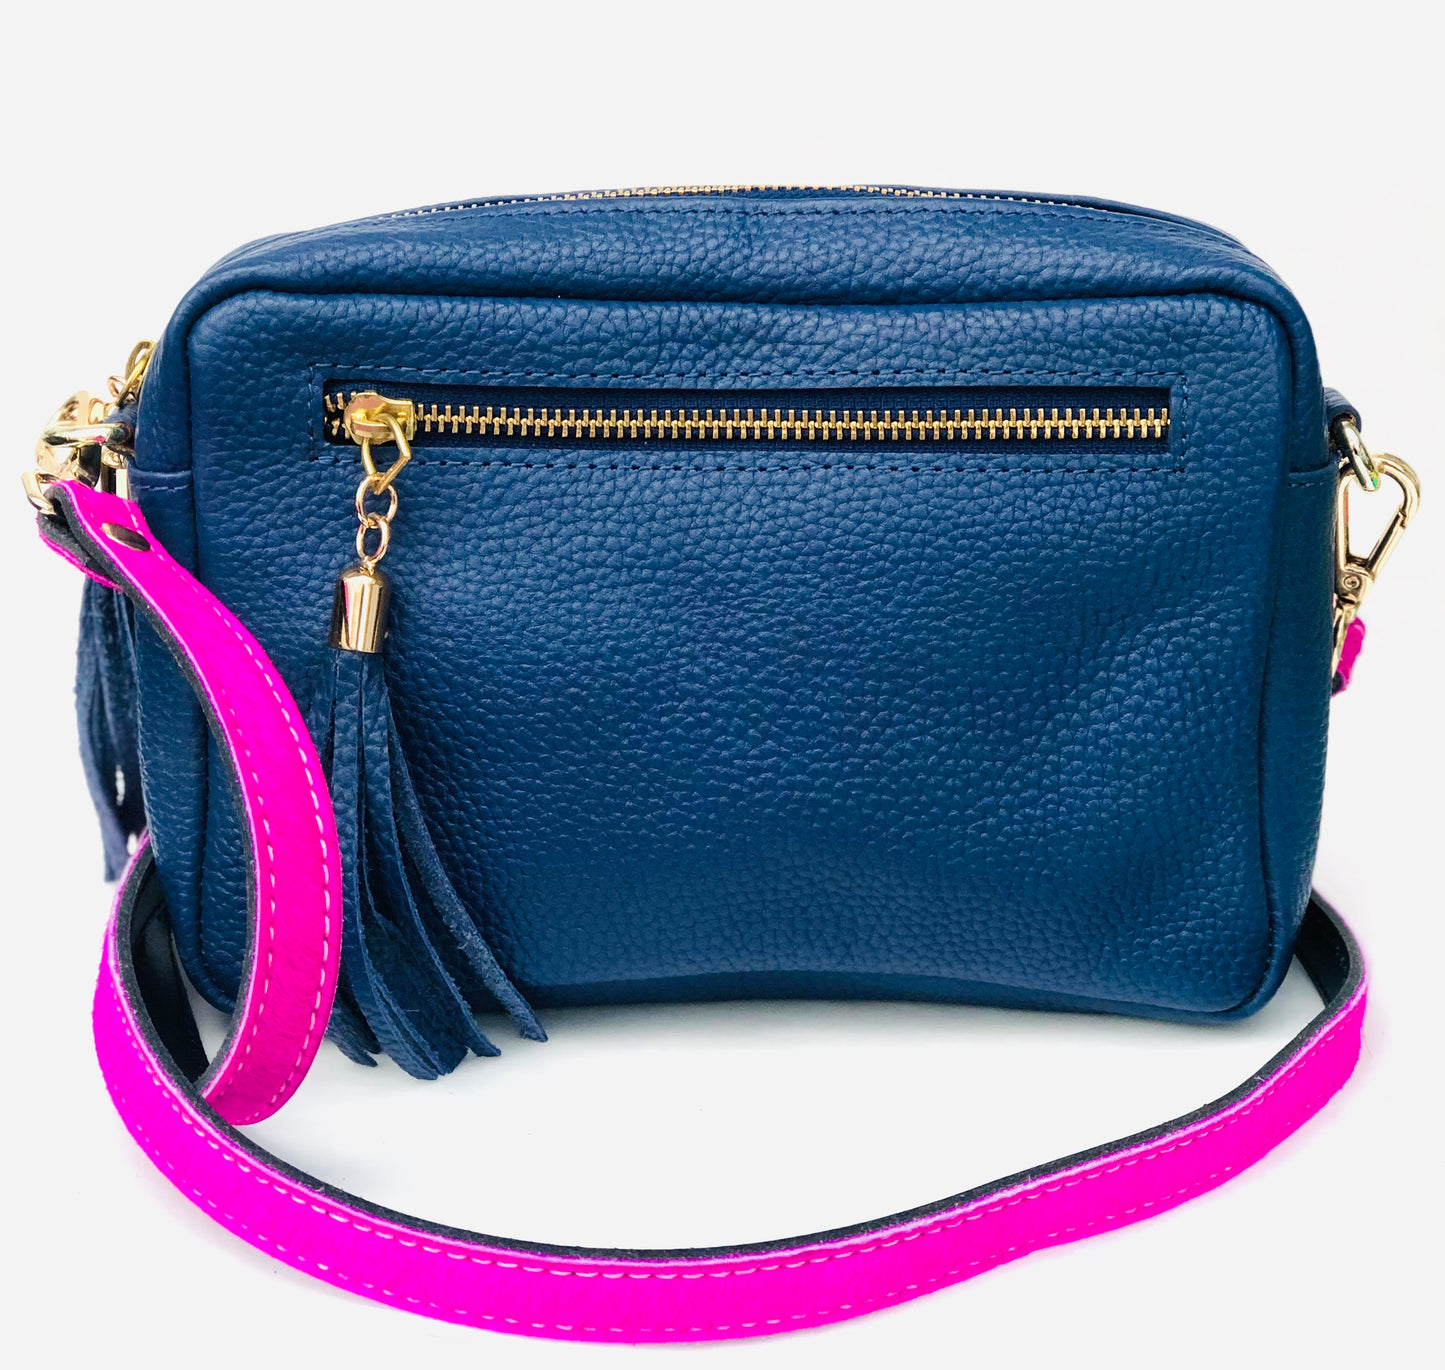 back side of blue leather bag with neon pink leather straps